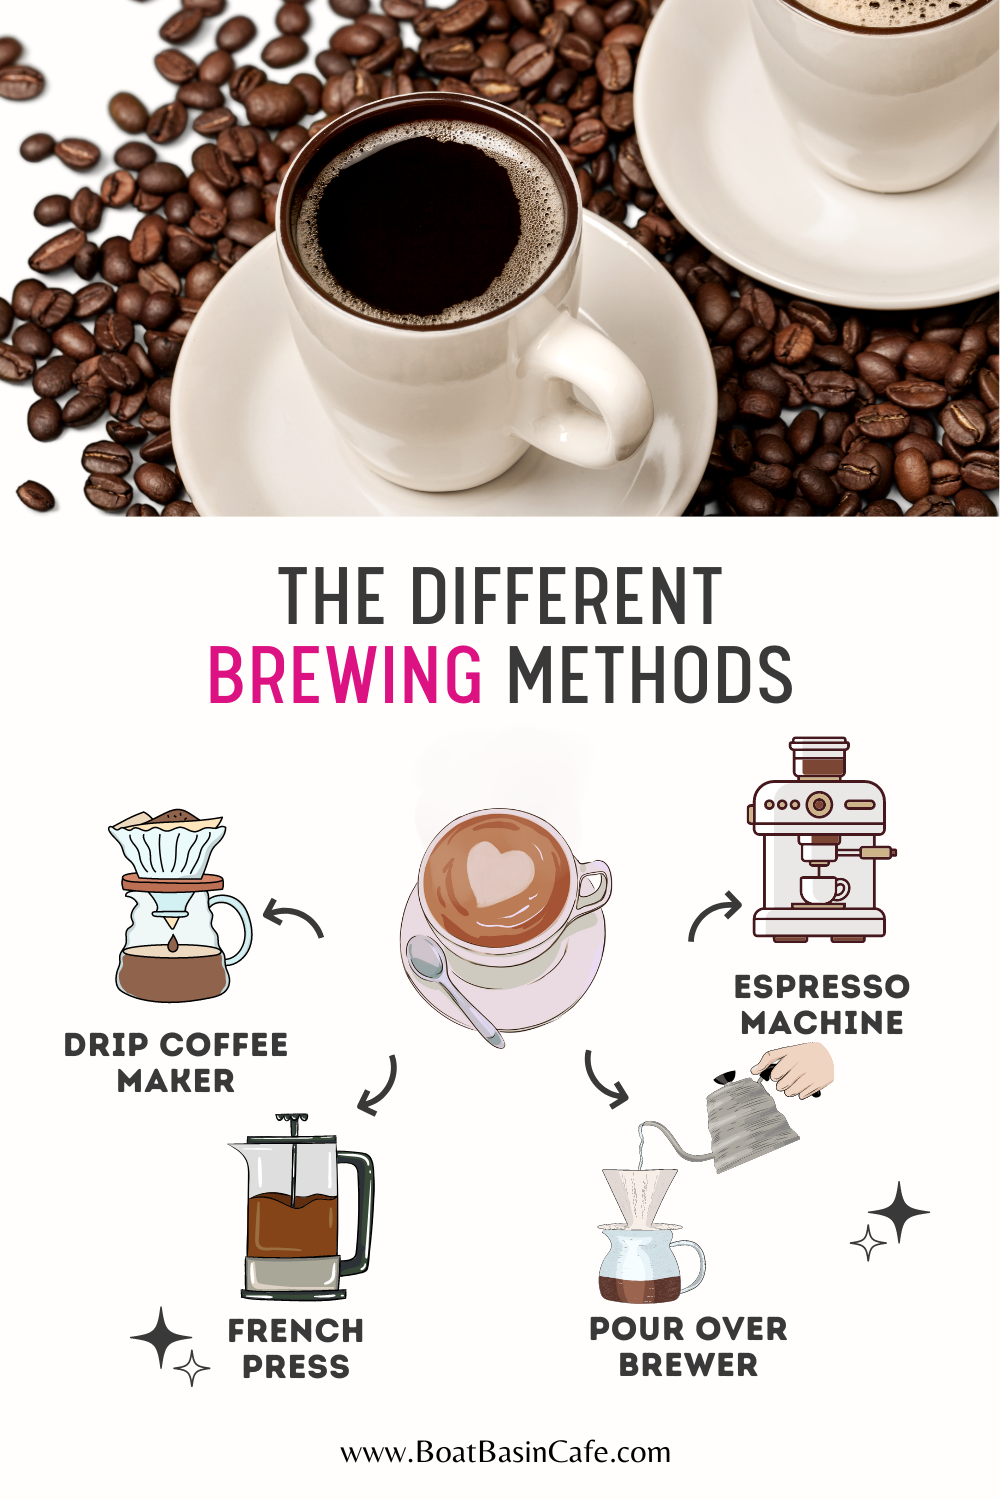 The Different Brewing Methods